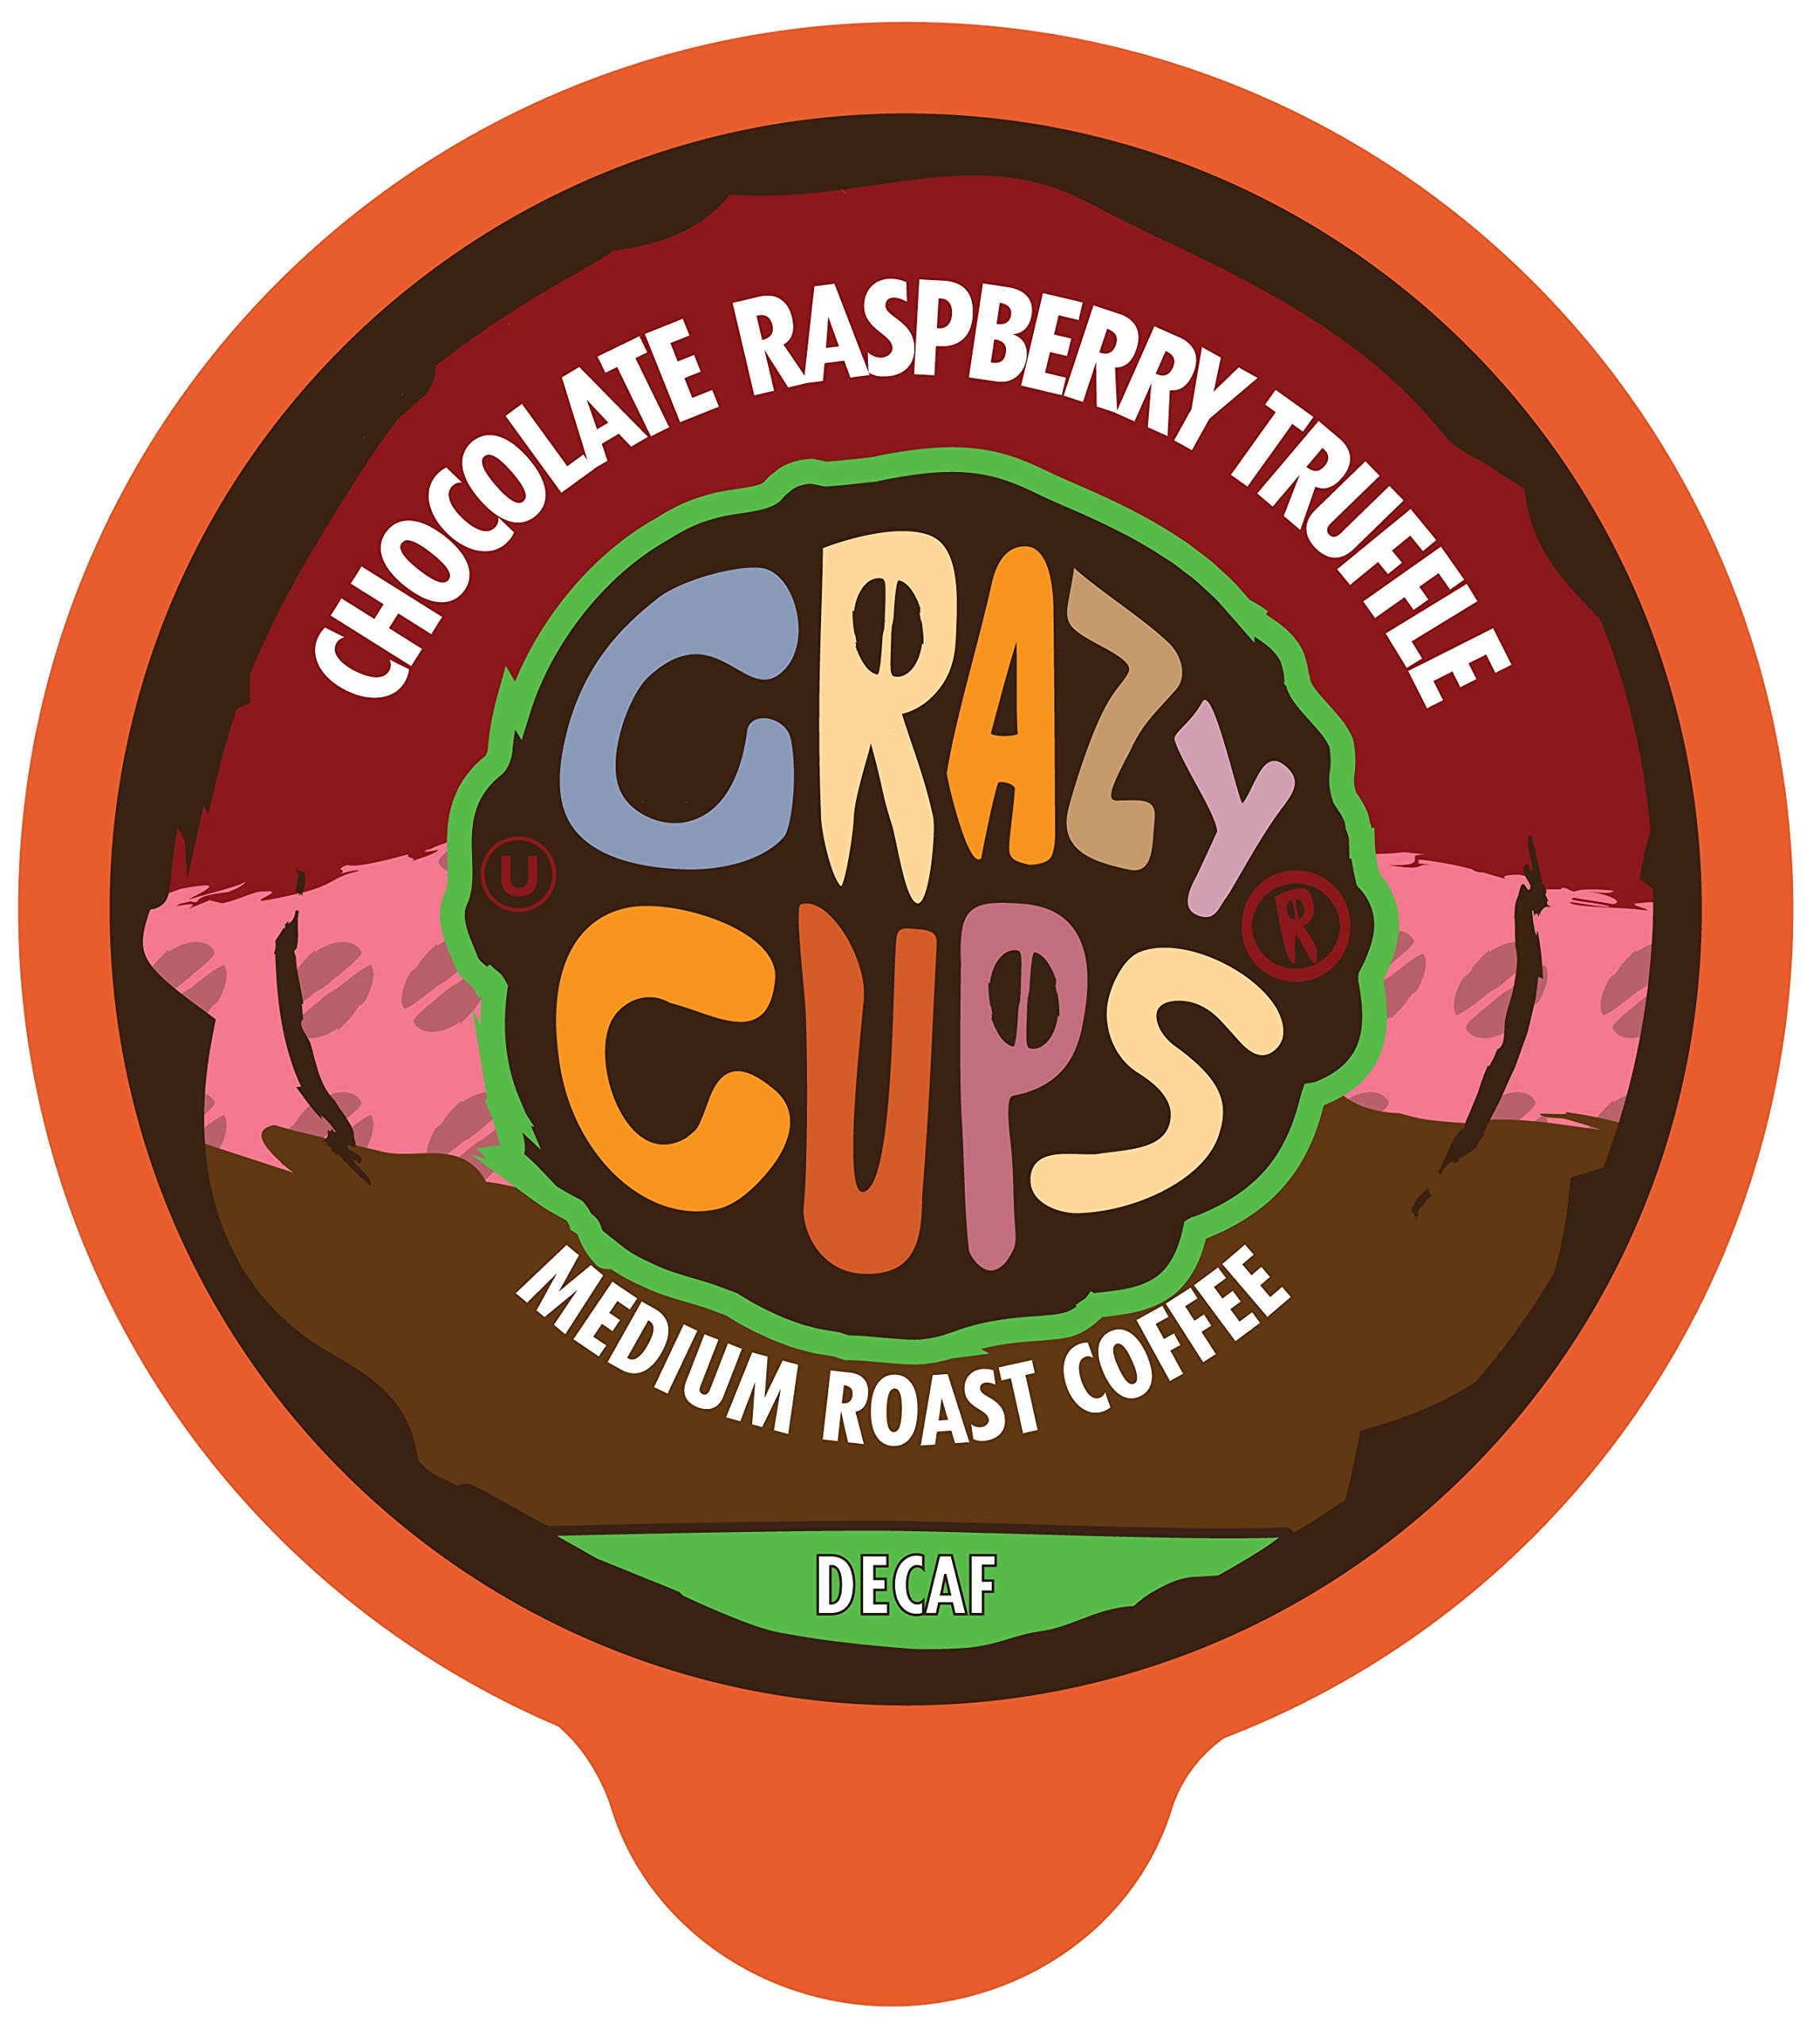 Book Cover Crazy Cups Flavored Single-Serve Coffee for Keurig K-Cups Machines, Decaf Chocolate Raspberry Truffle, 22 Pods per Box Decaf Chocolate Raspberry Truffle 22 Count (Pack of 1)